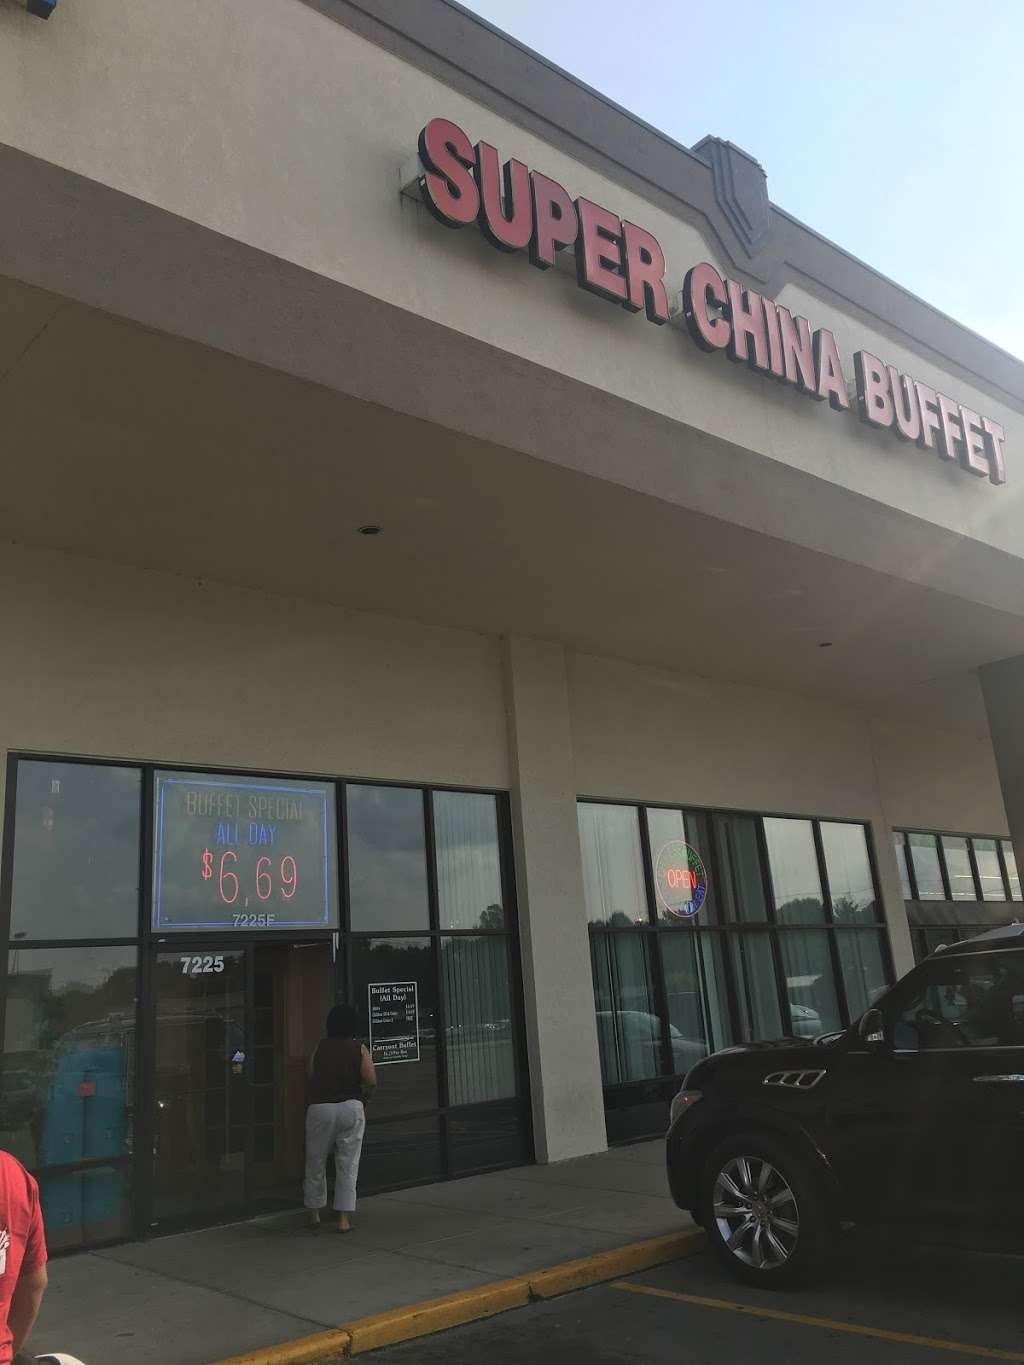 Super China Buffet | 7225 N Keystone Ave # E, Indianapolis, IN 46240 | Phone: (317) 205-9868